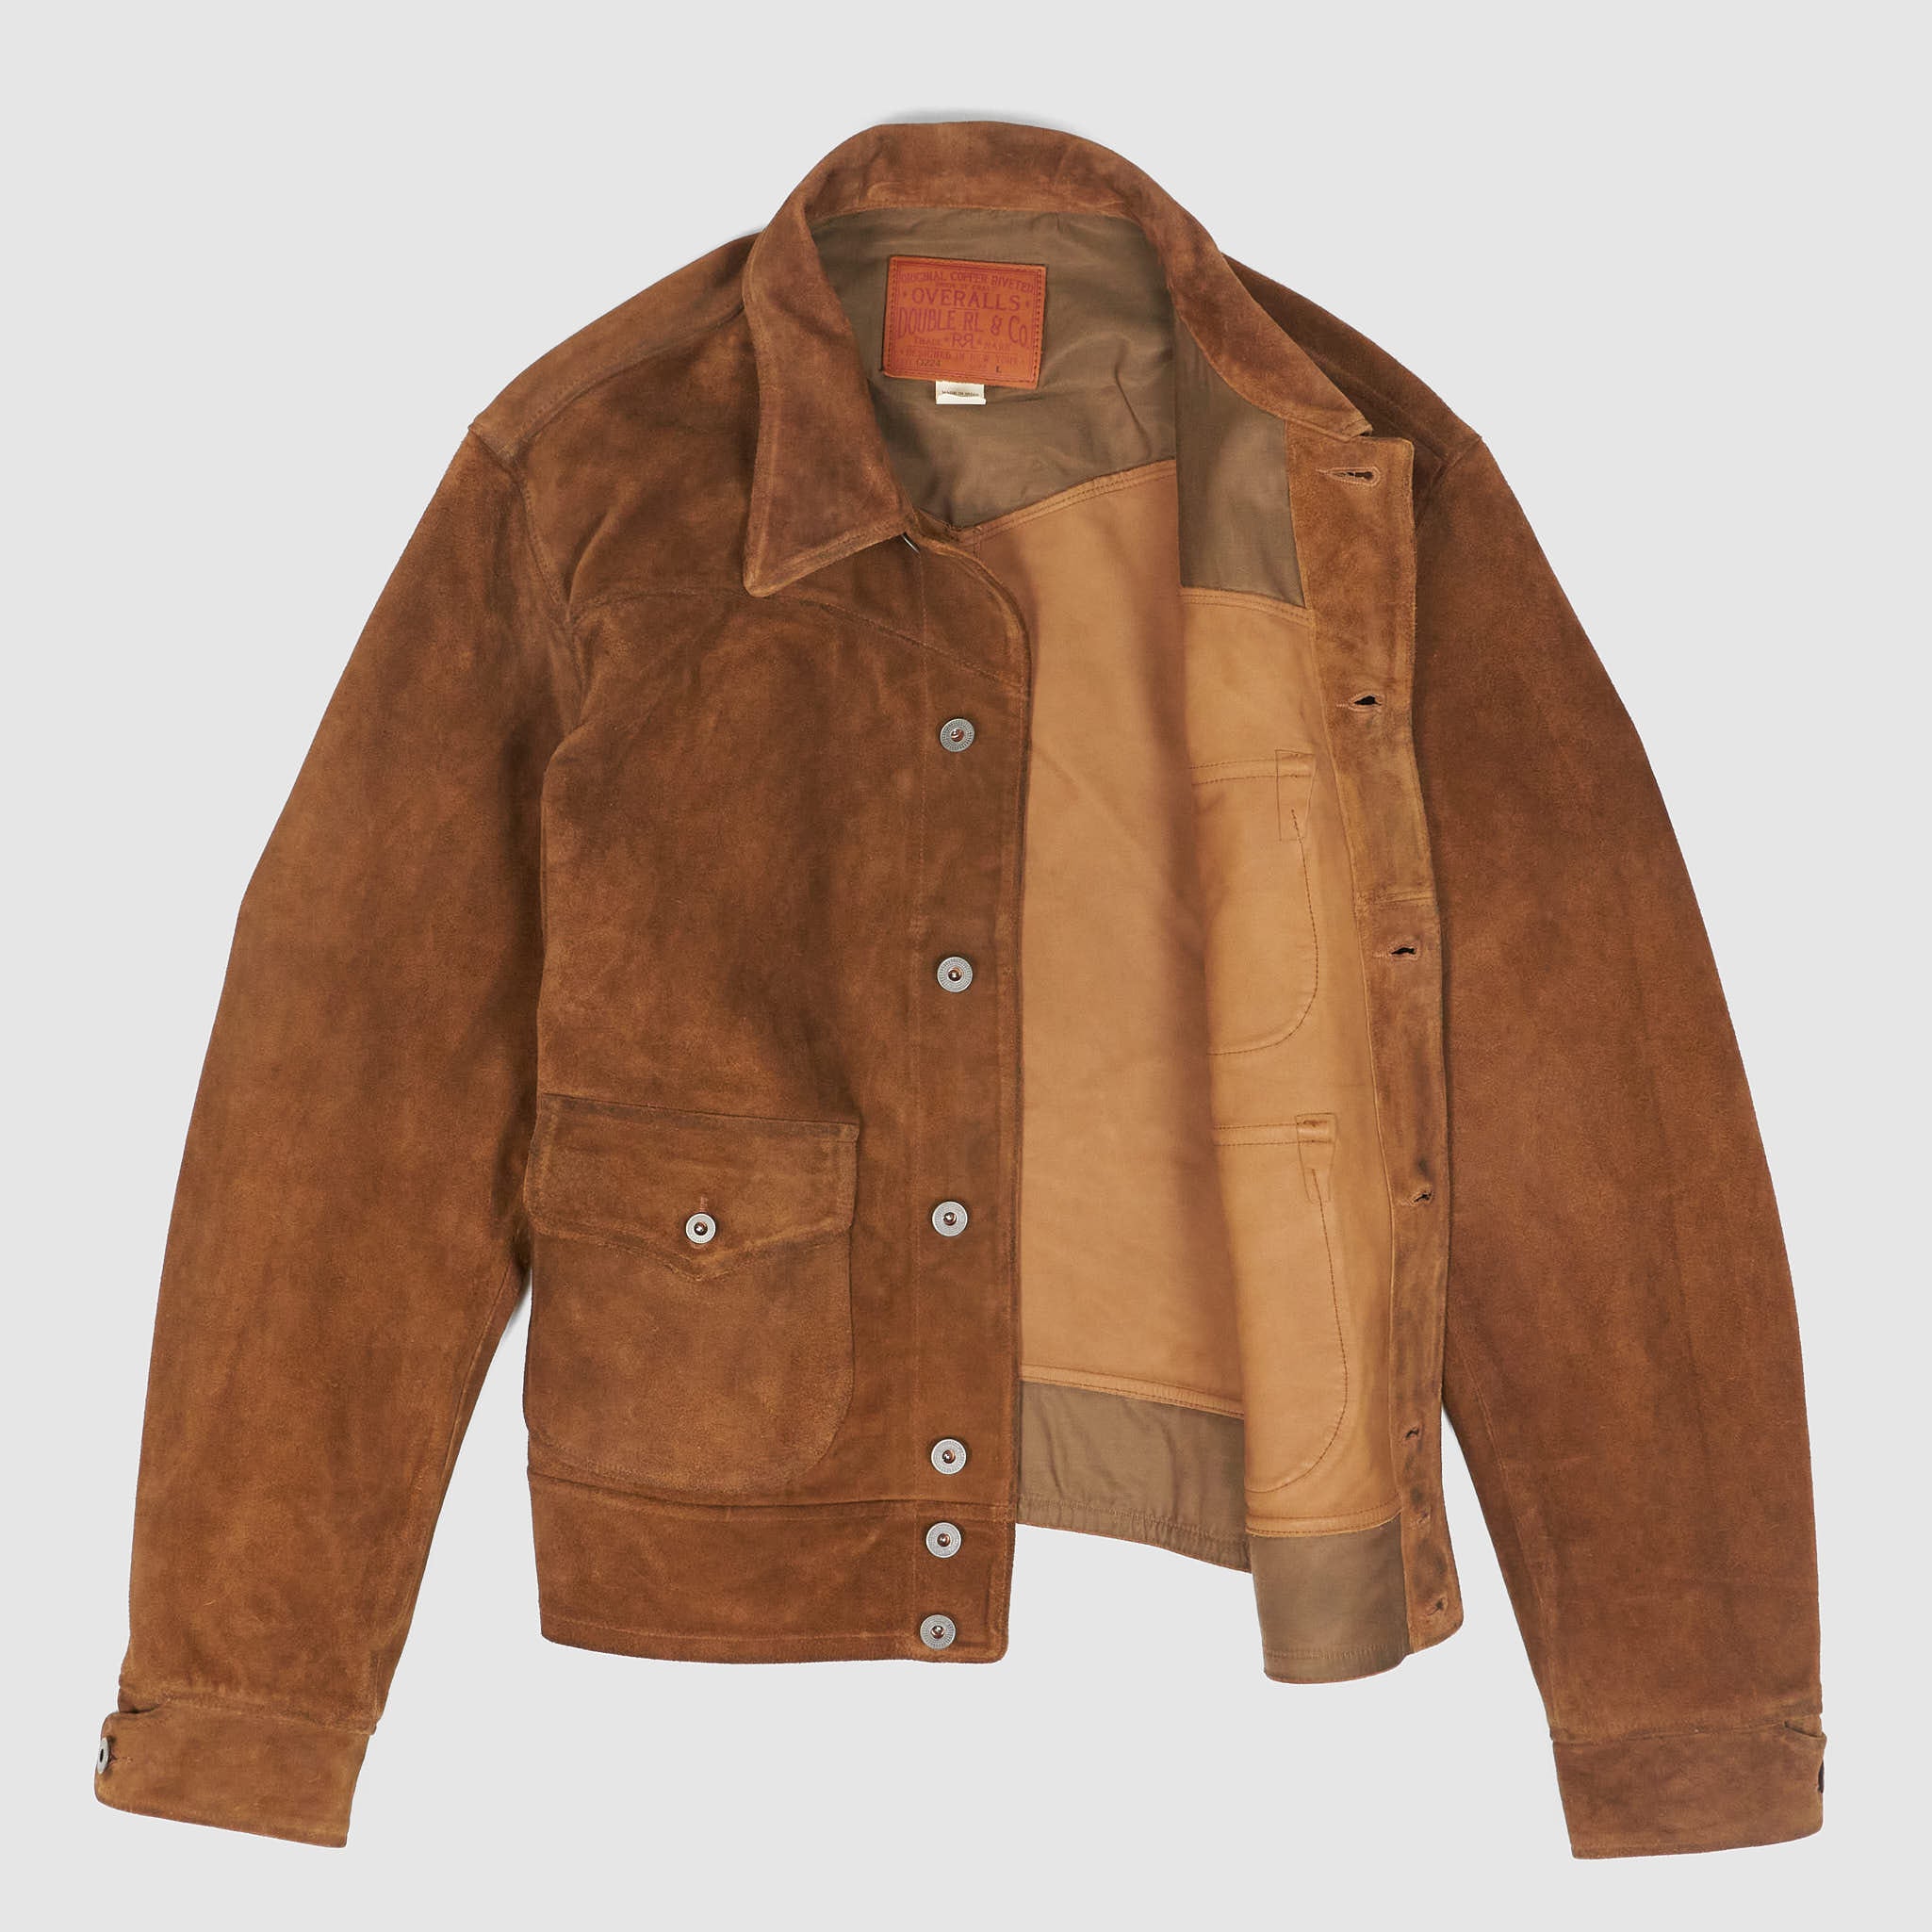 Double RL Suede Roughout Western Leather Jacket - DeeCee style